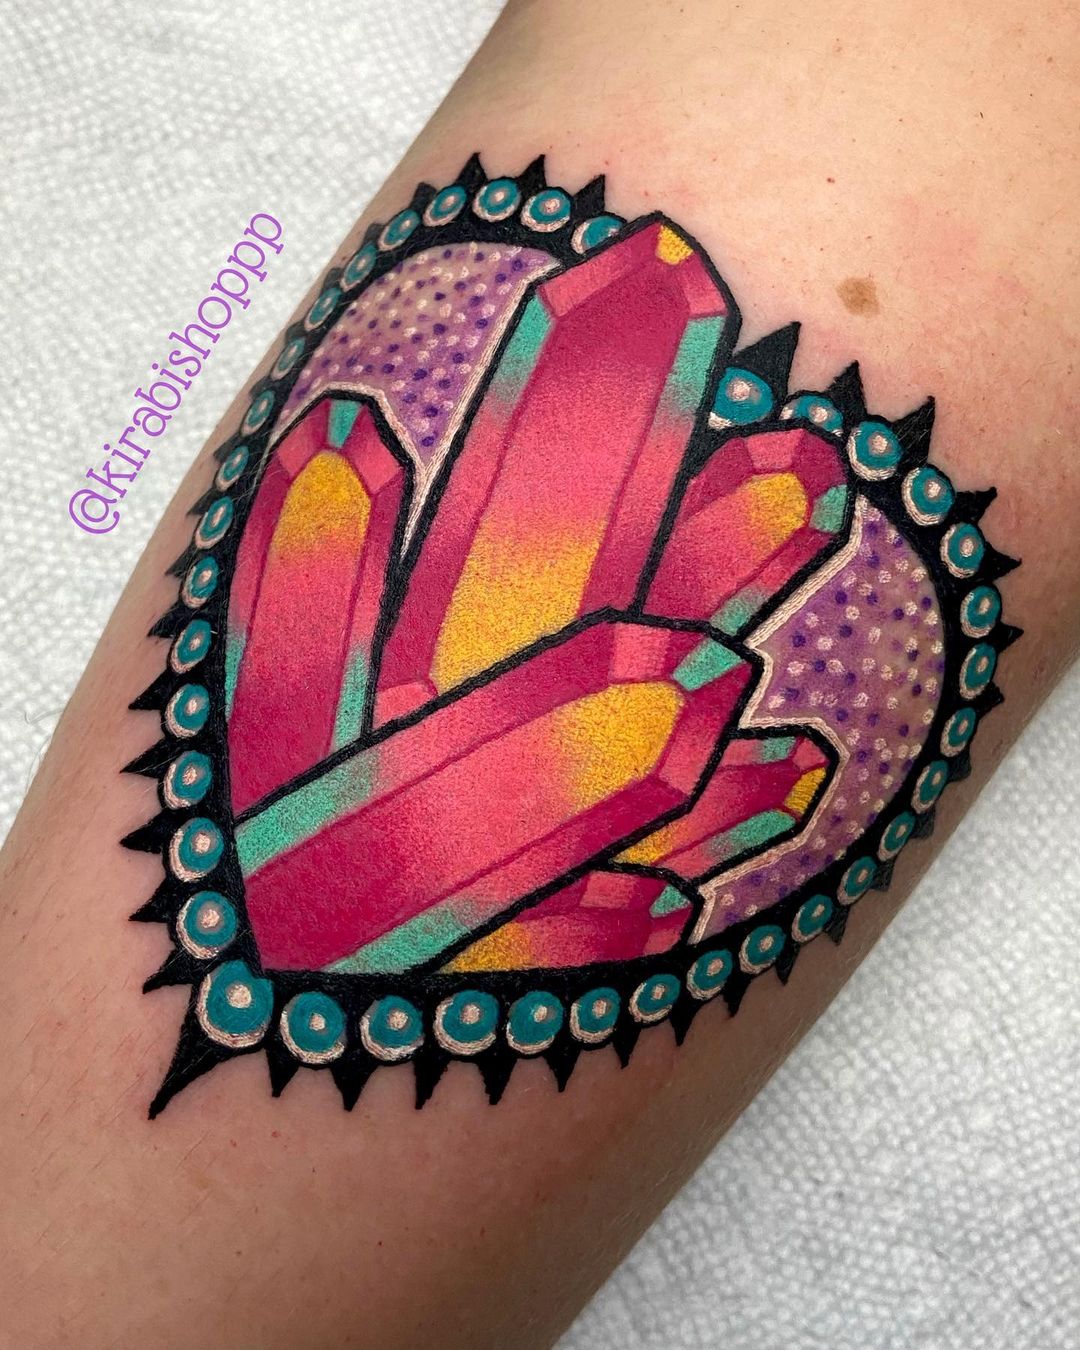 25 Tattoos by Female Tattoo Artists That Prove Ink Is No Man's Game